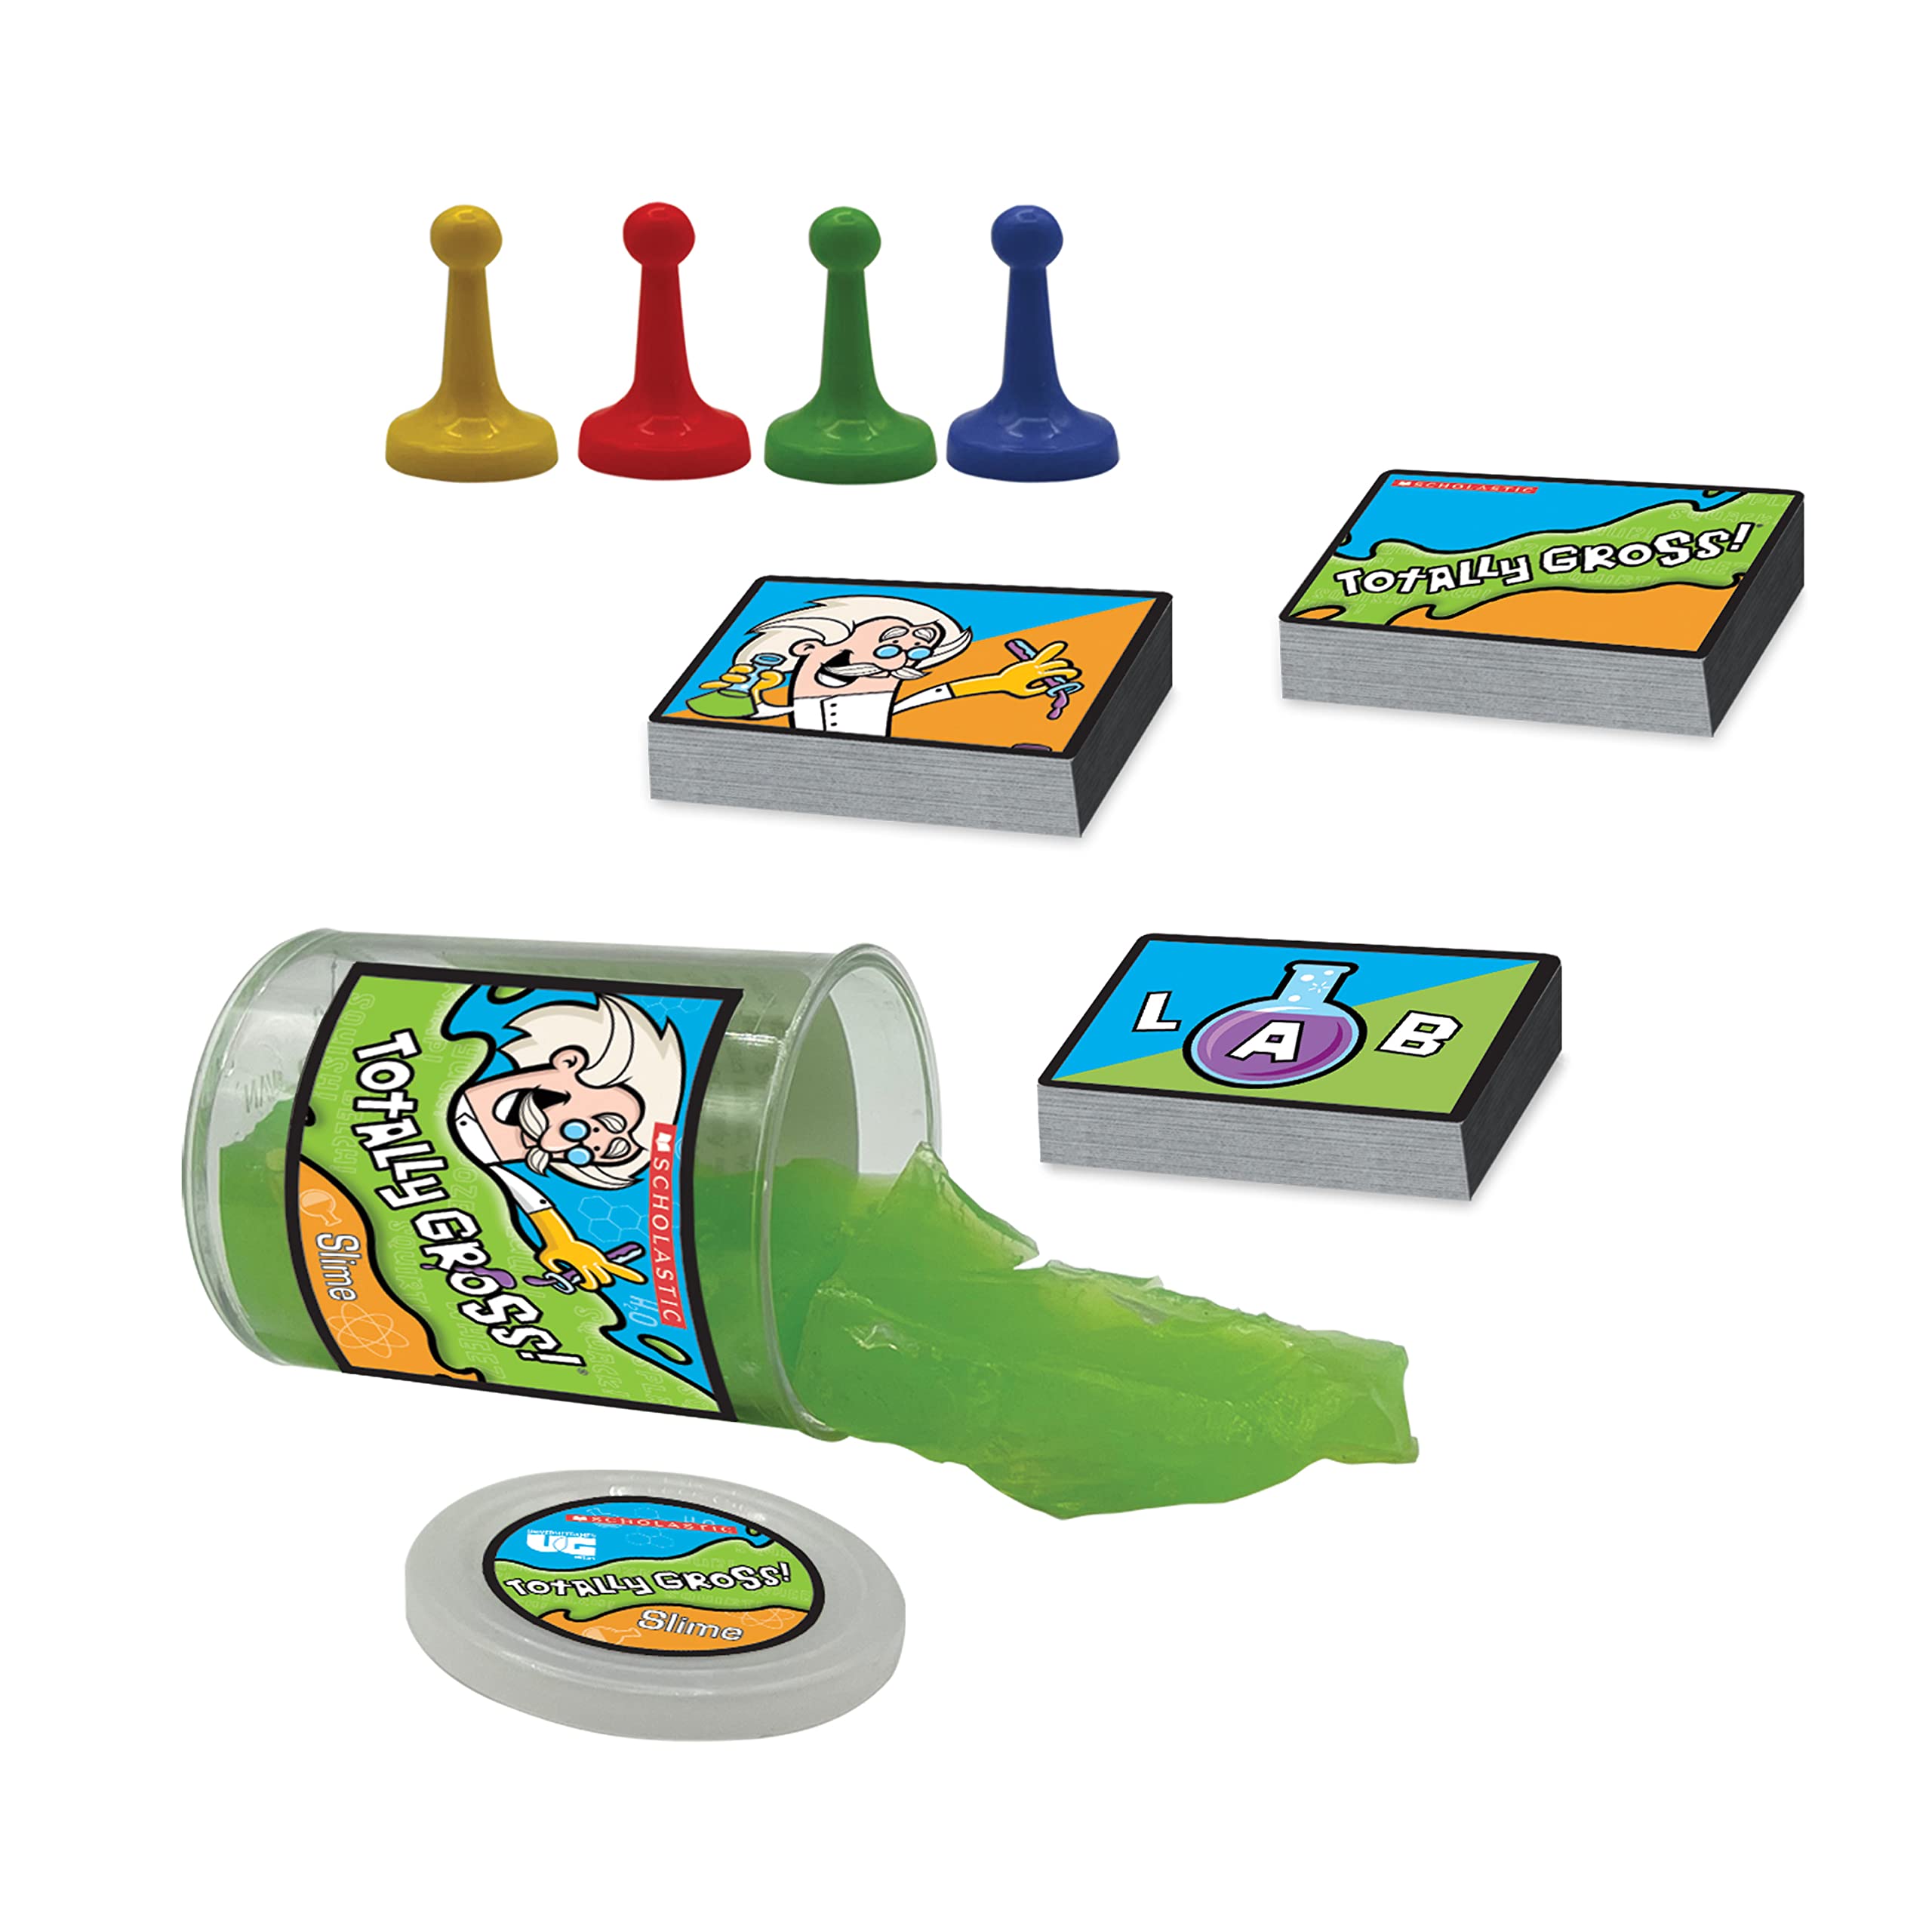 Scholastic Totally Gross Game of Science Including Real Slime from University Games, for 2 to 4 Players Ages 6 and Up (06135)